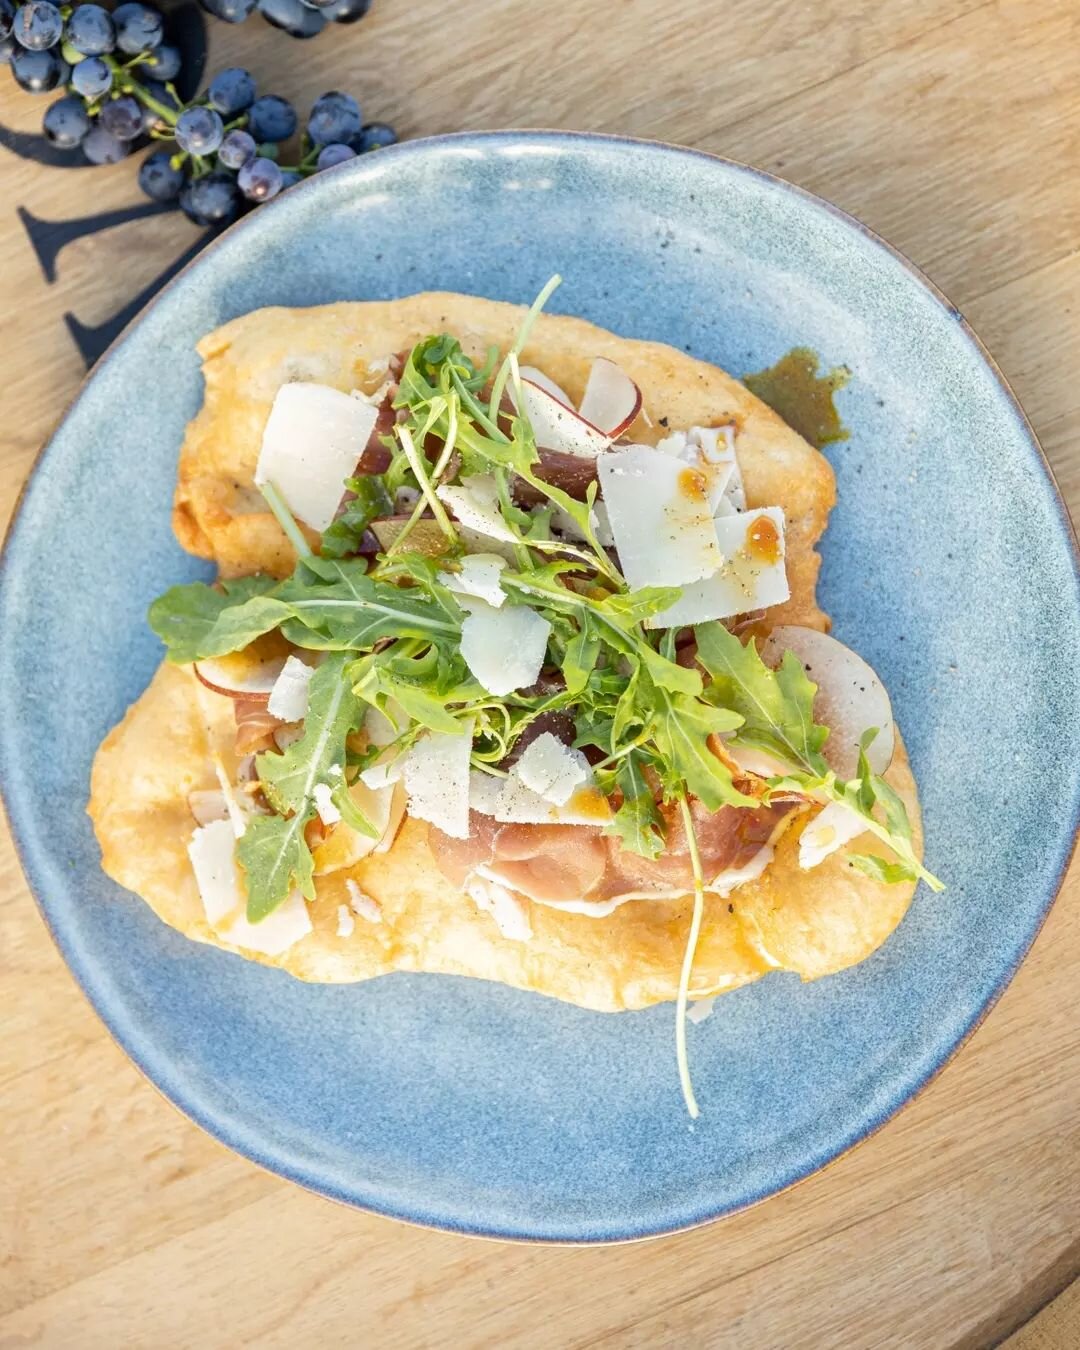 These pizzettas topped with pear, prosciutto and rocket are just the thing for when you're having friends over. Pair them with a glass of red from the @barossavalleywinecompany, and you've got a perfect Saturday lunch.👌🍷
Find the recipe on our webs